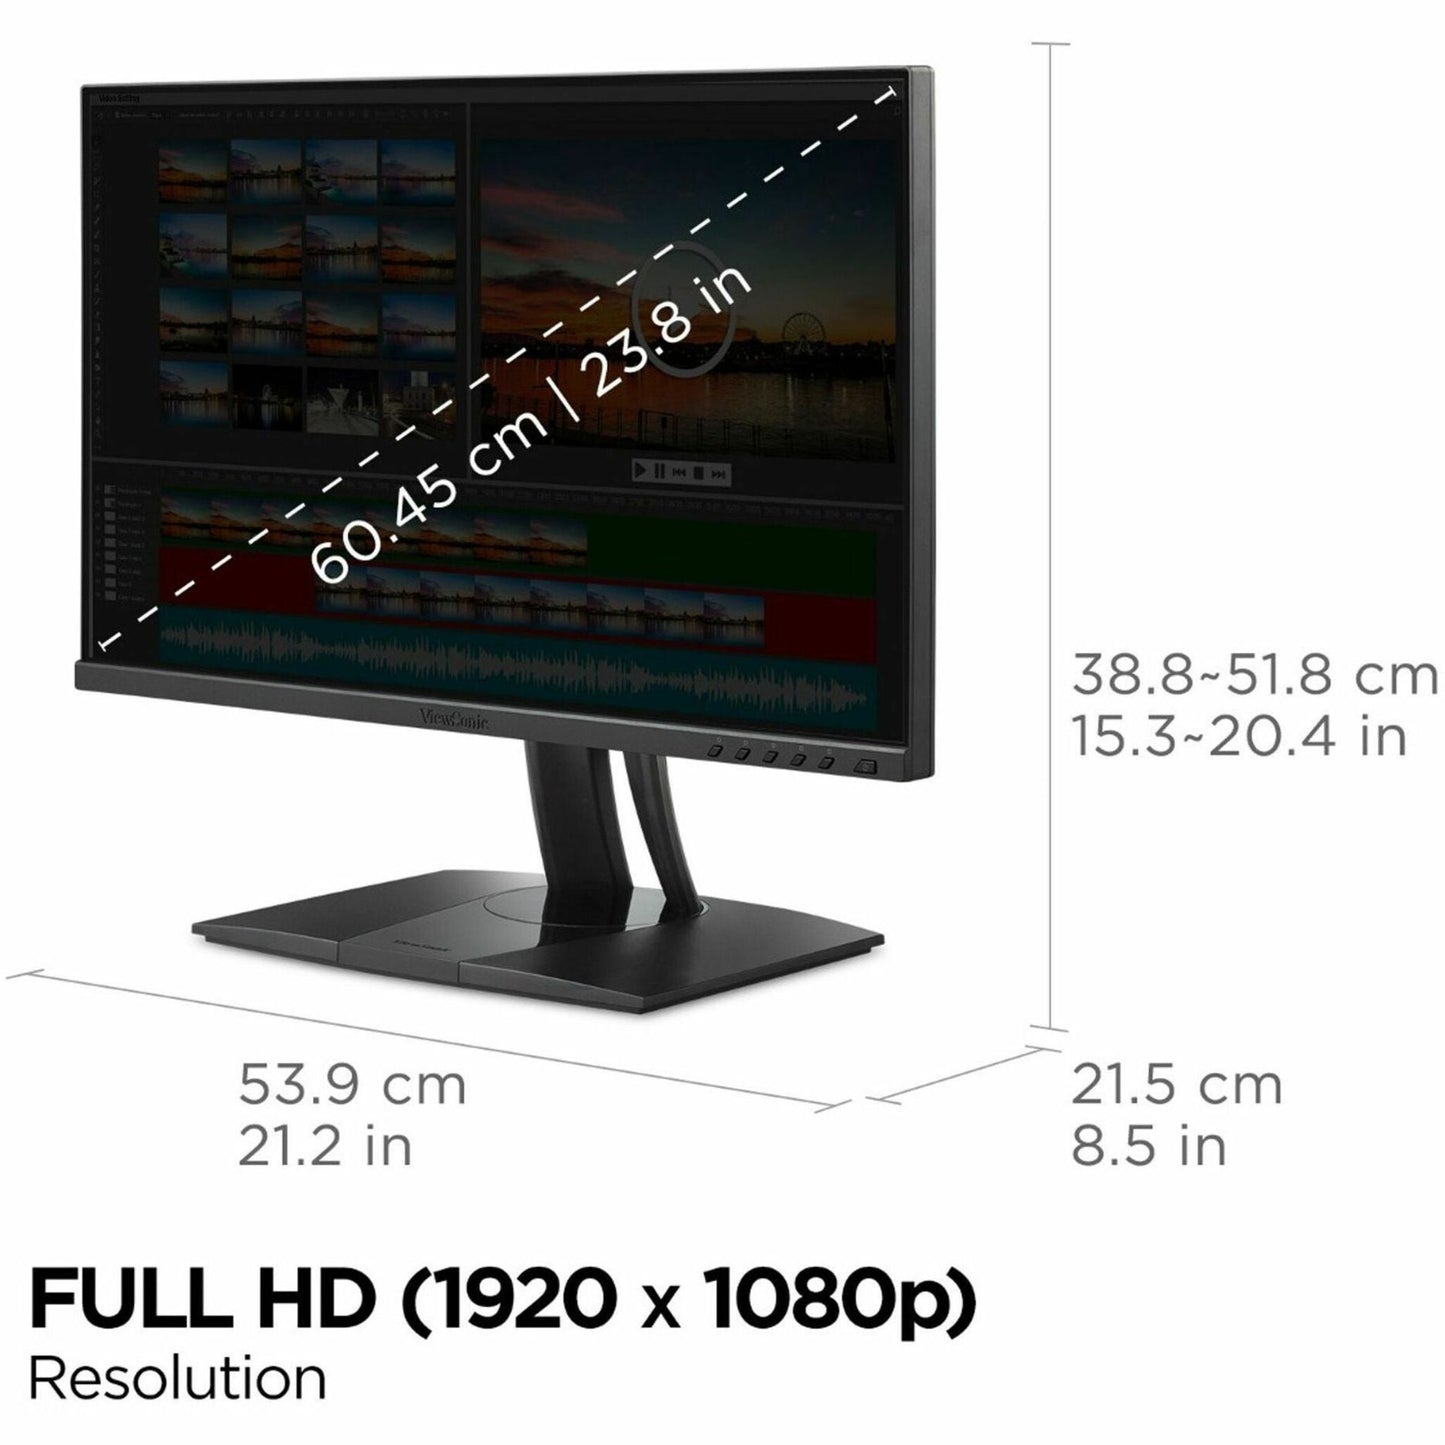 ViewSonic VP2456 24 Inch 1080p Premium IPS Monitor with Ultra-Thin Bezels Color Accuracy Pantone Validated HDMI DisplayPort and USB C for Professional Home and Office